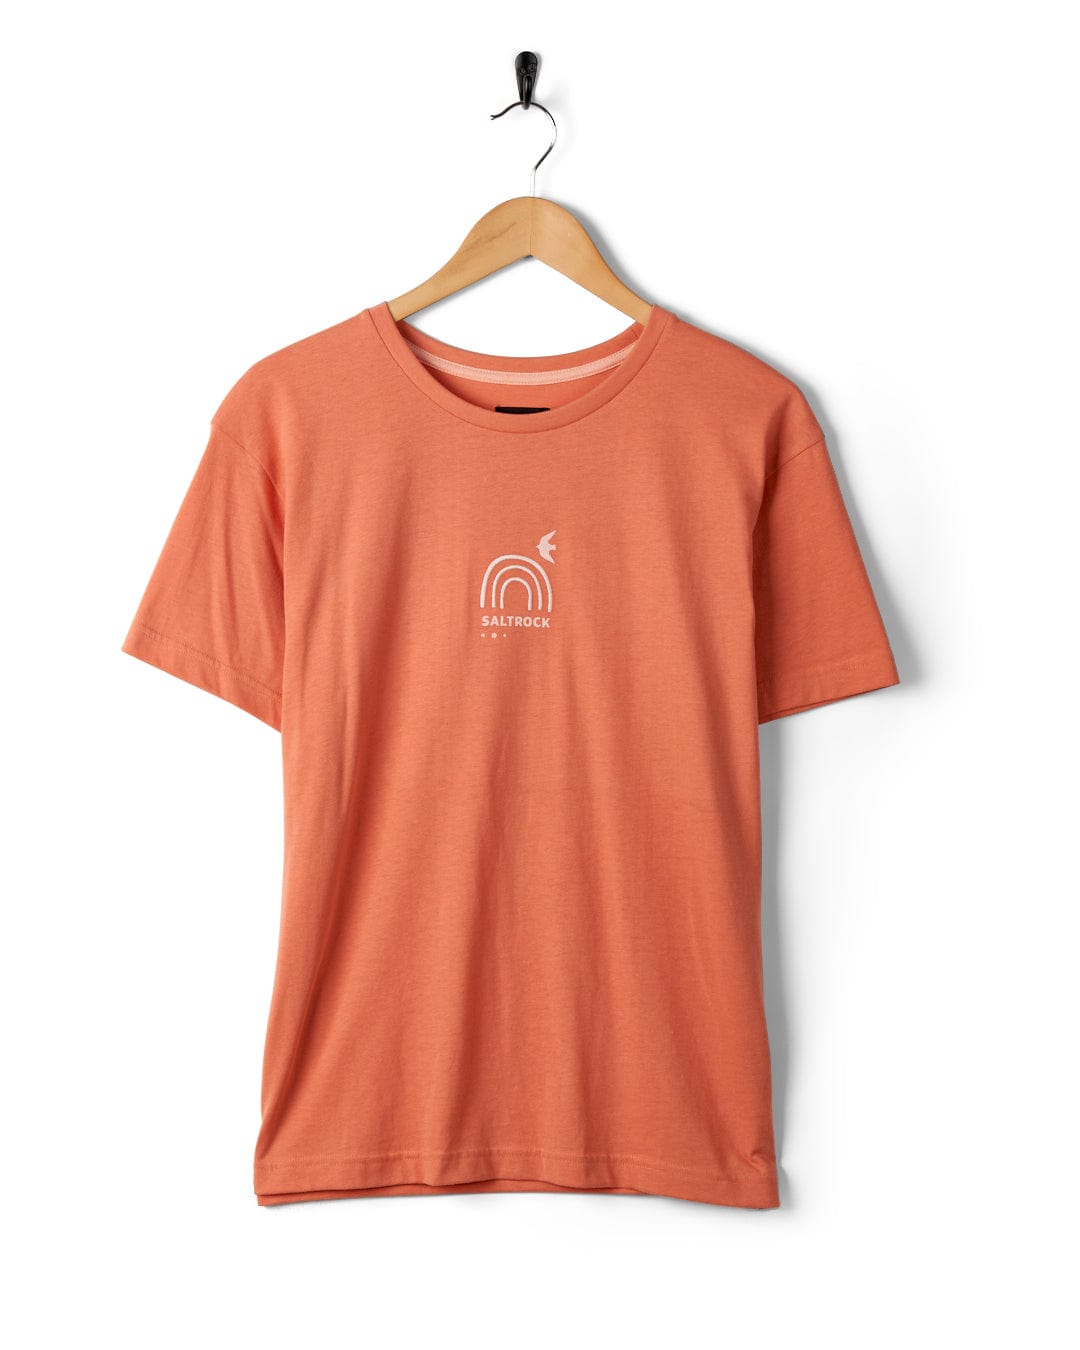 Saltrock Journey - Recycled Womens Short Sleeve T-Shirt in Peach with an embroidered circular logo on the chest, displayed on a wooden hanger against a white background.